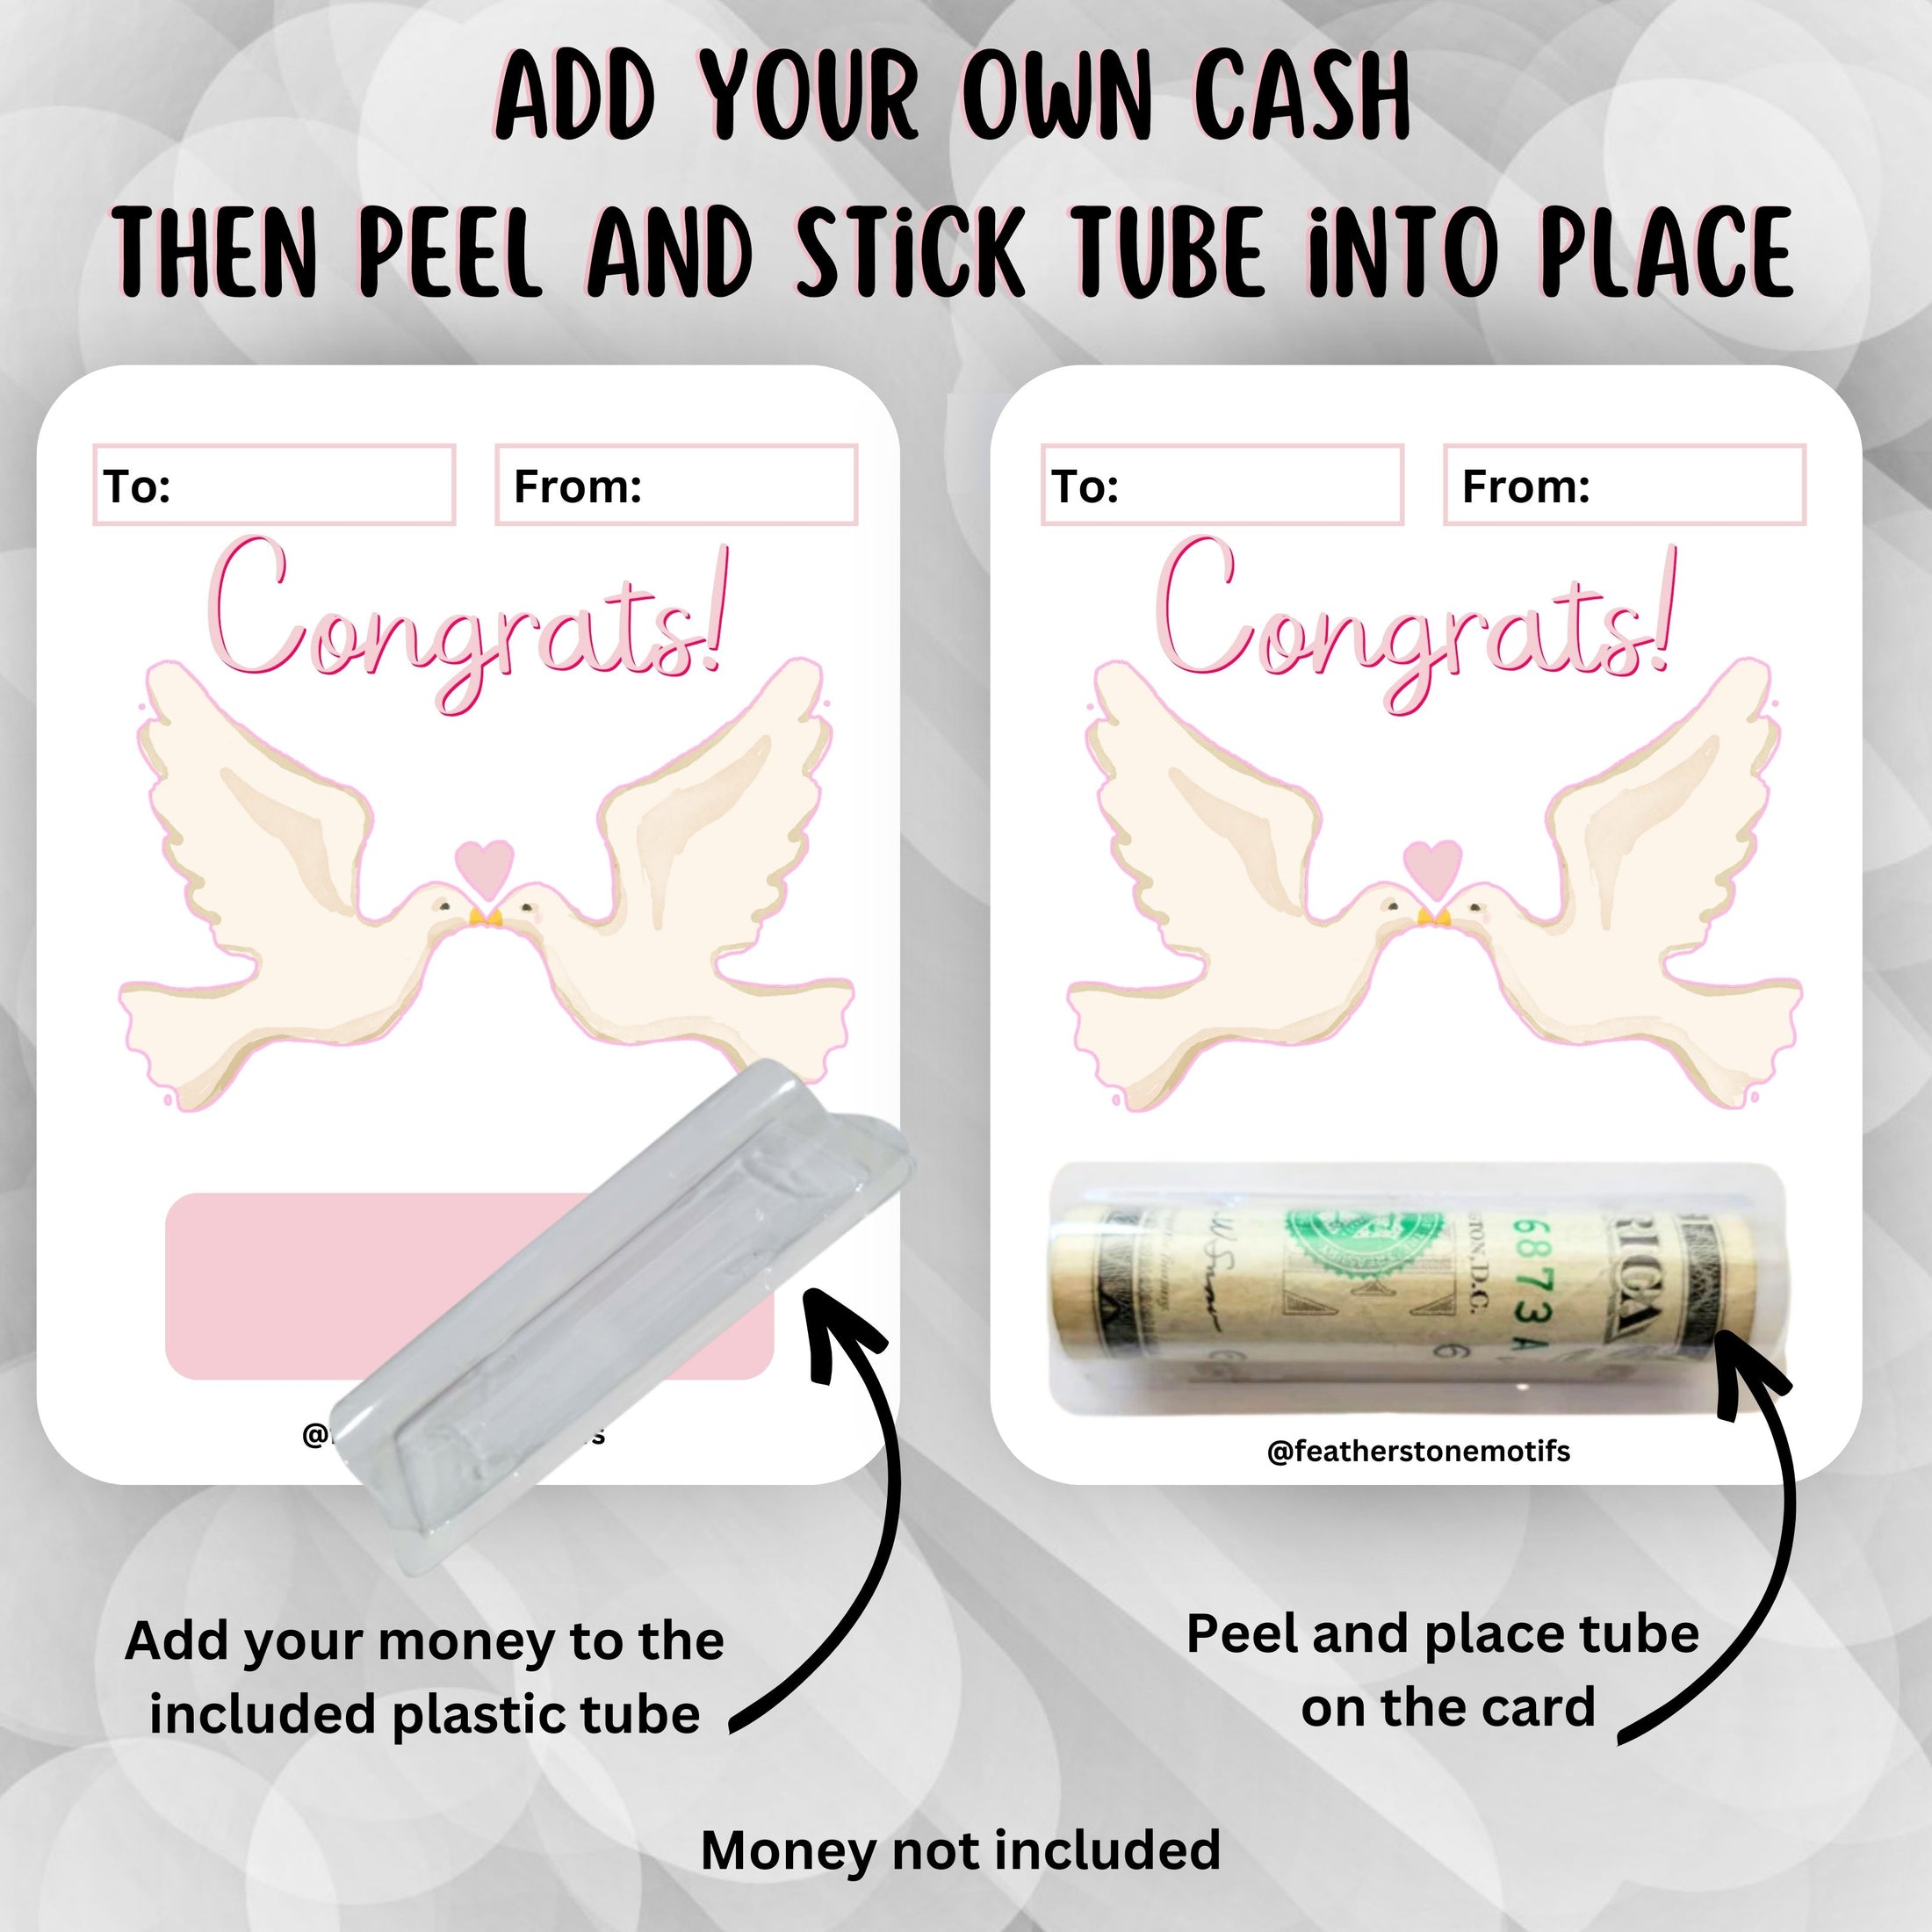 This image shows how to attach the money tube to the Congrats! Money Card.